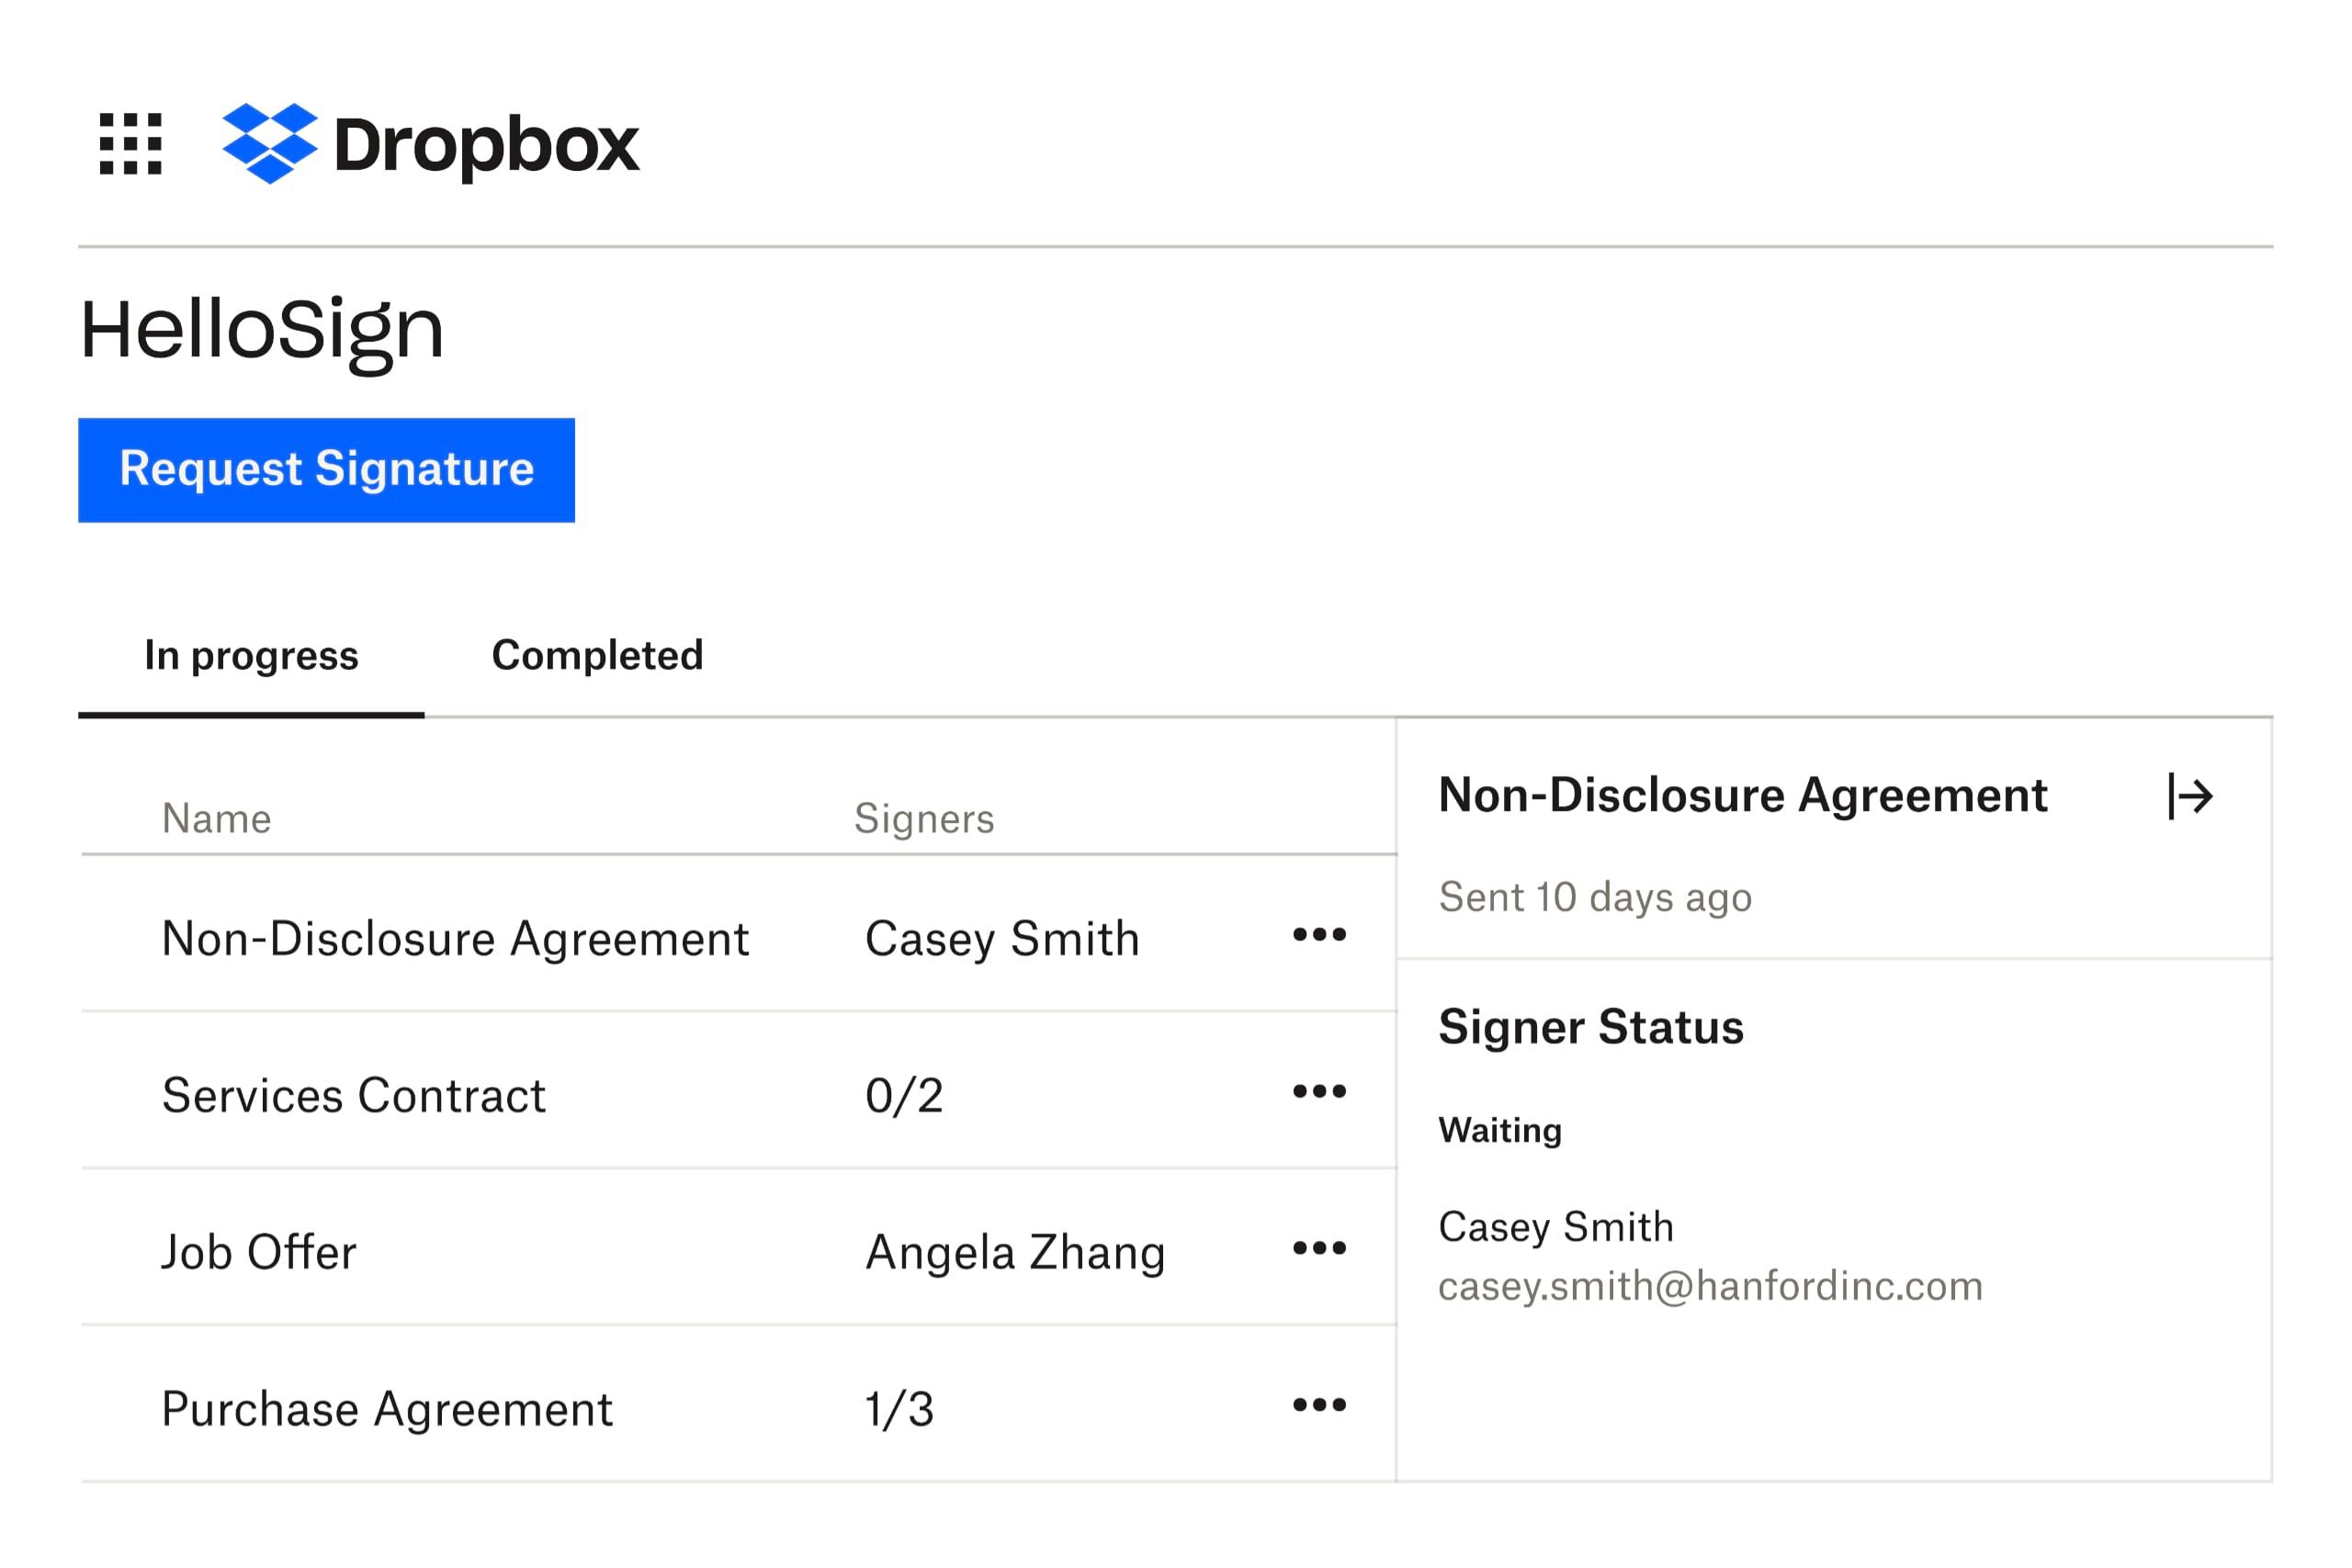 The HelloSign interface within Dropbox, showing a list of files that are in progress for signature, and the date the files were sent to the sigatories